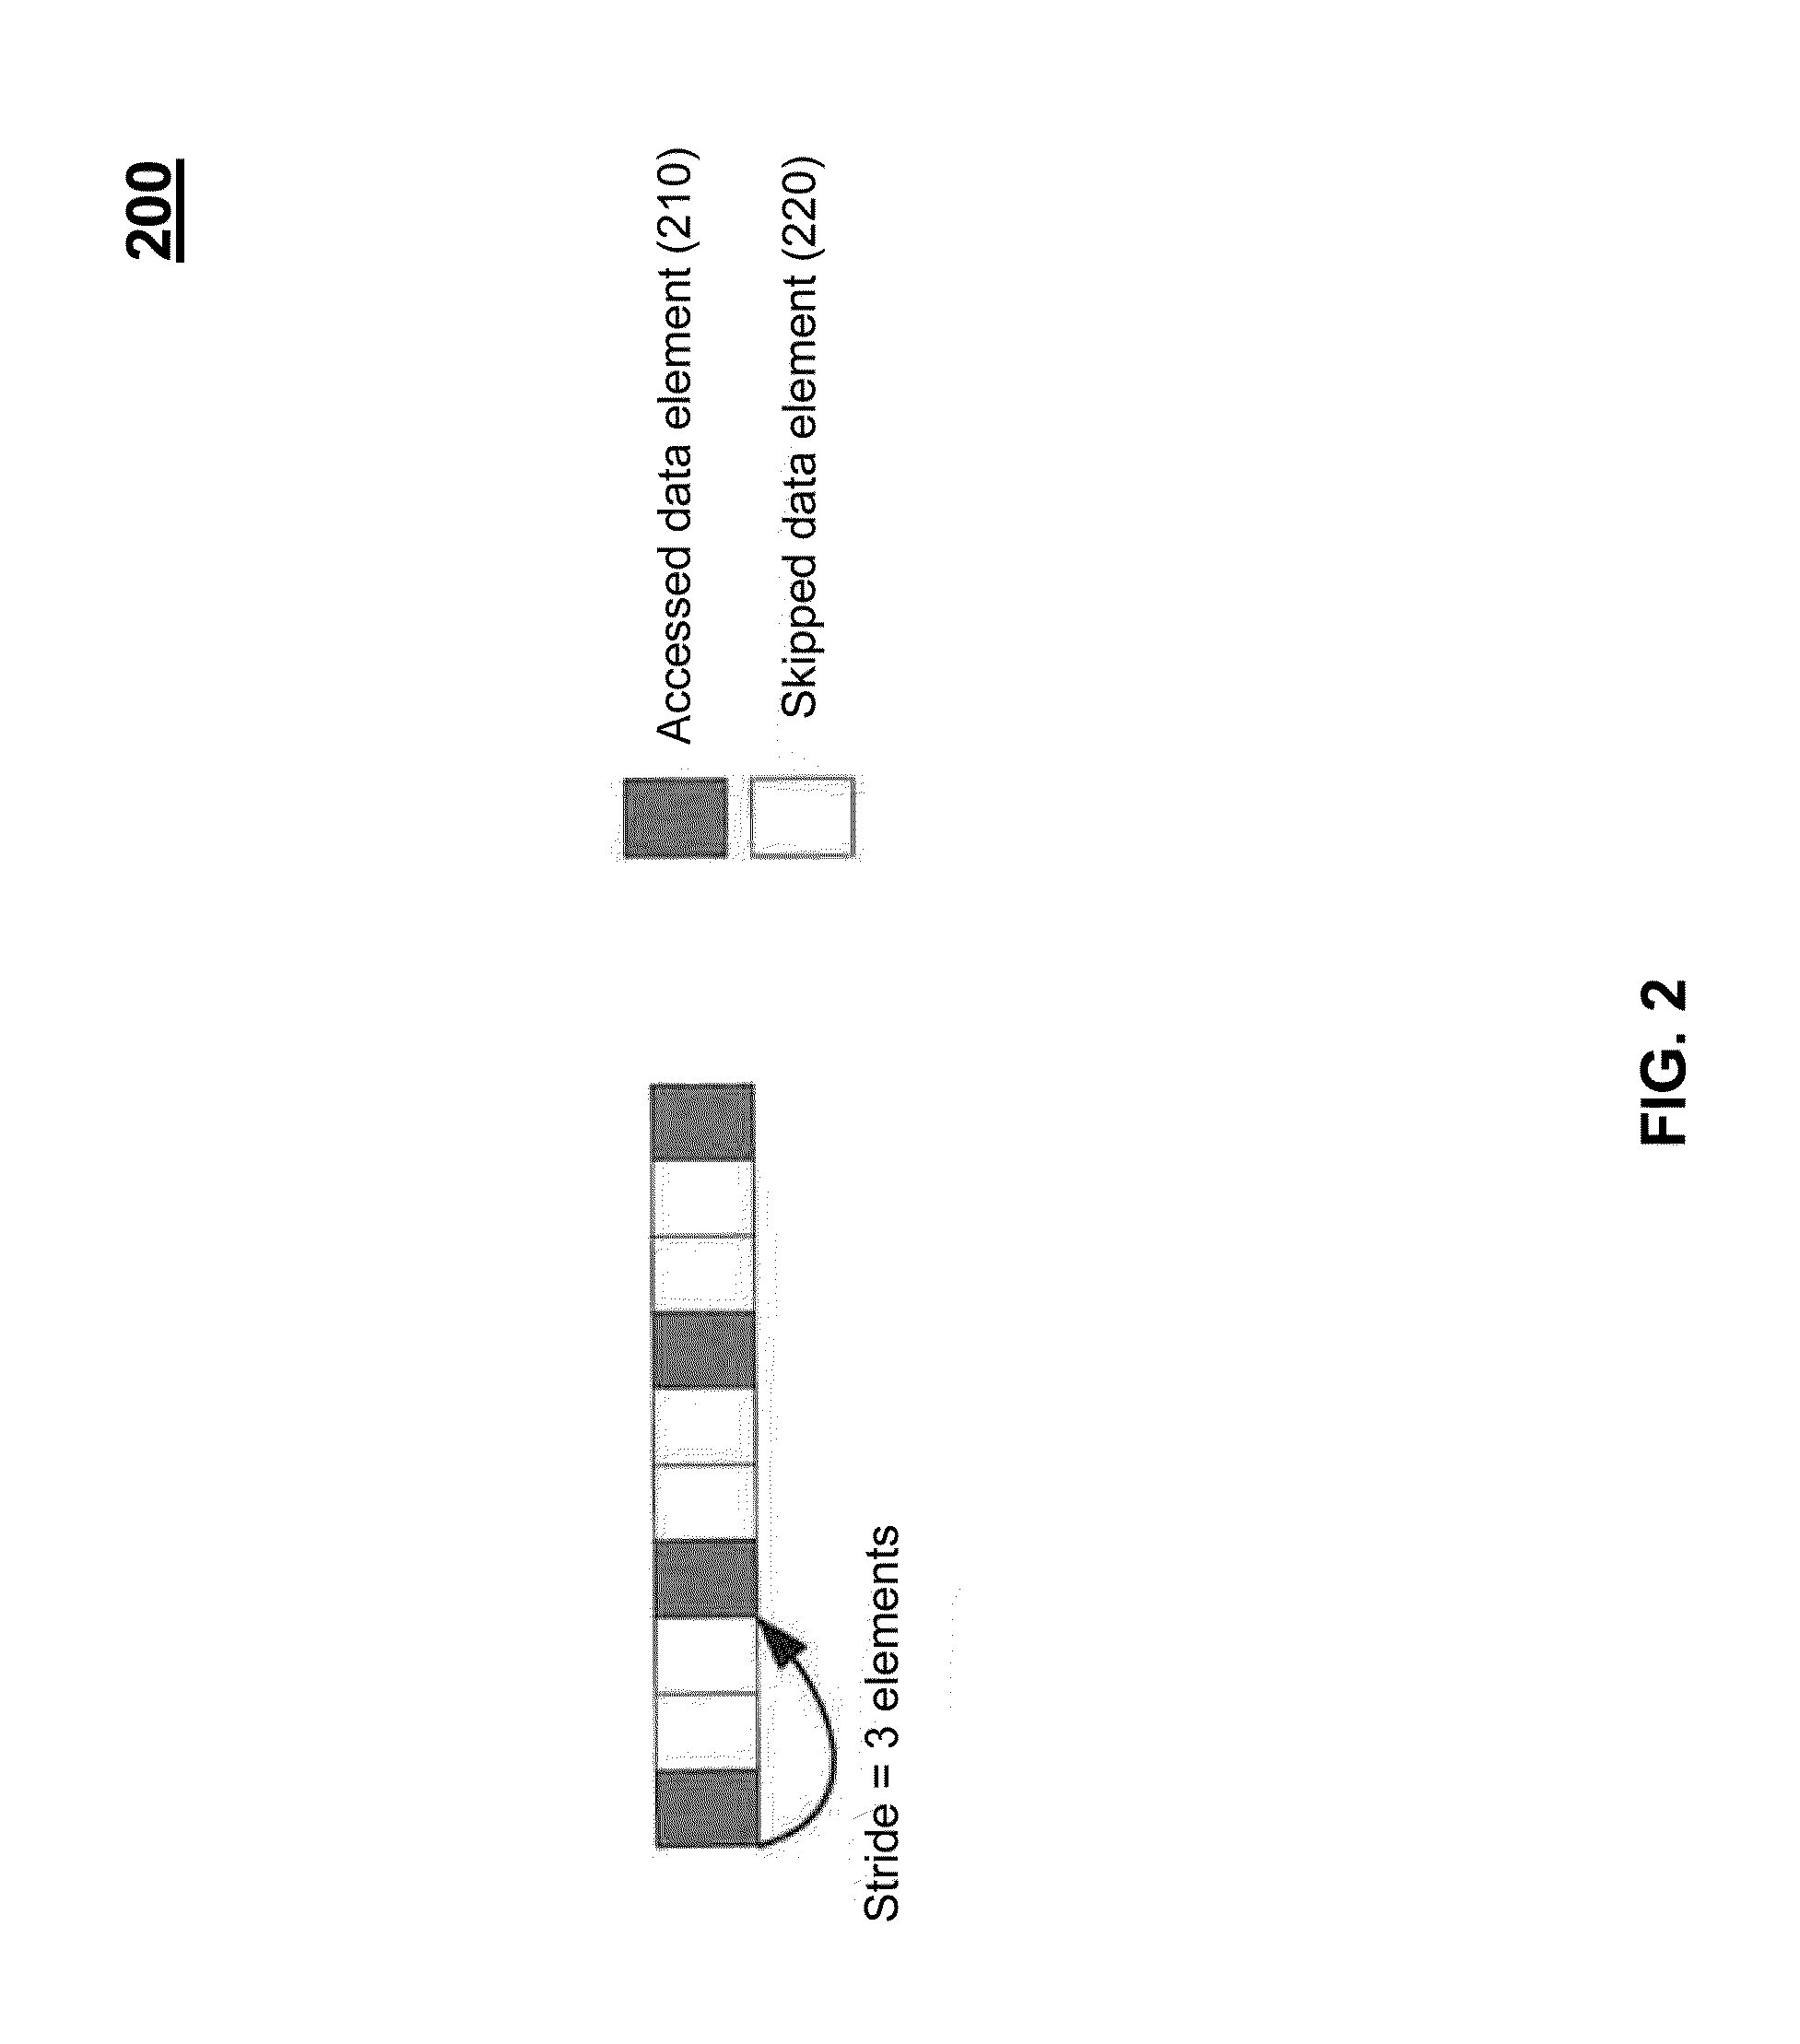 Compound Memory Operations in a Logic Layer of a Stacked Memory